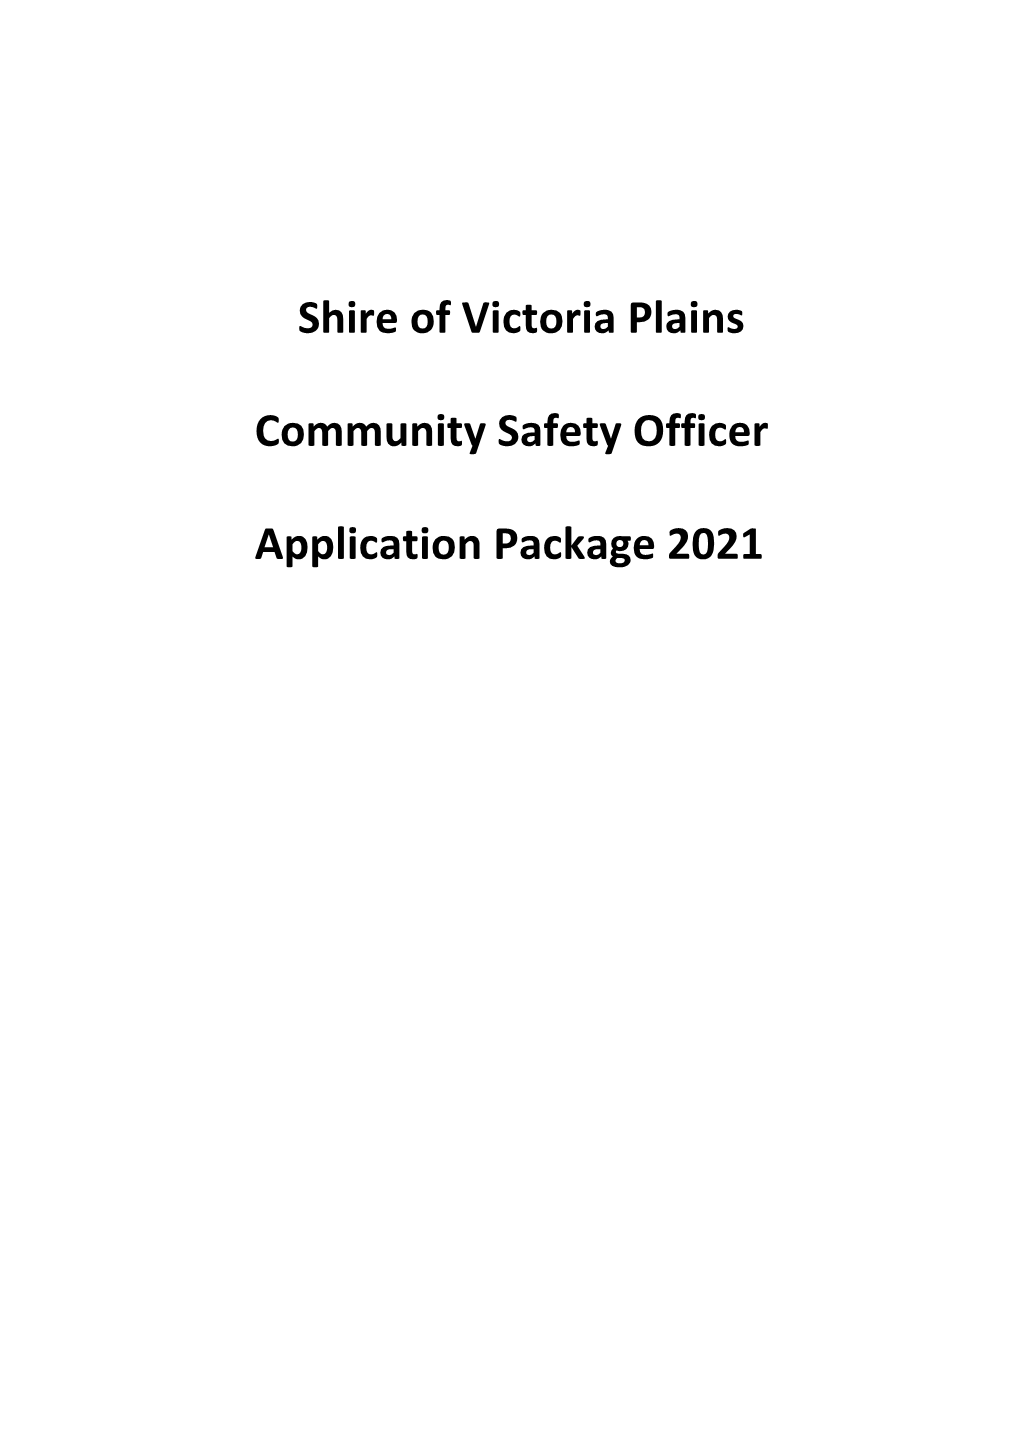 Shire of Victoria Plains Community Safety Officer Application